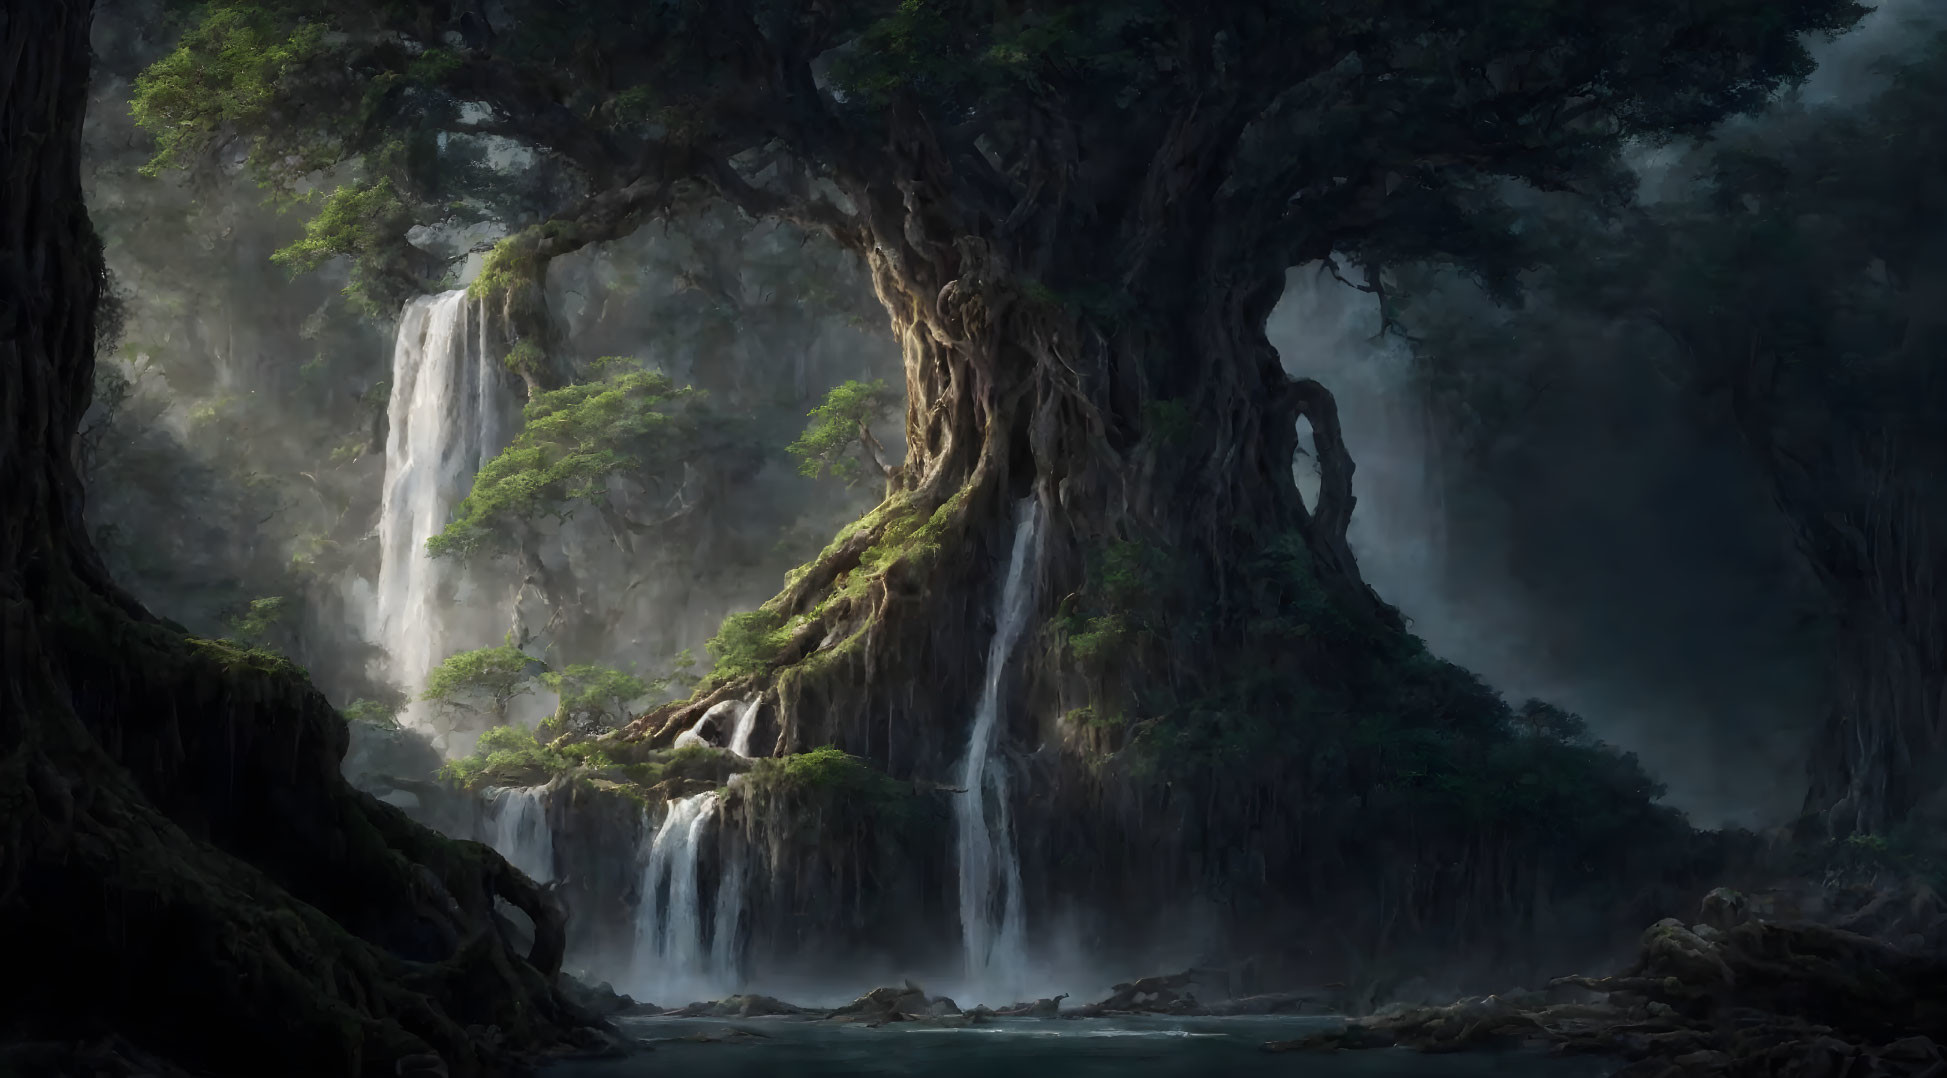 Ancient tree with waterfalls